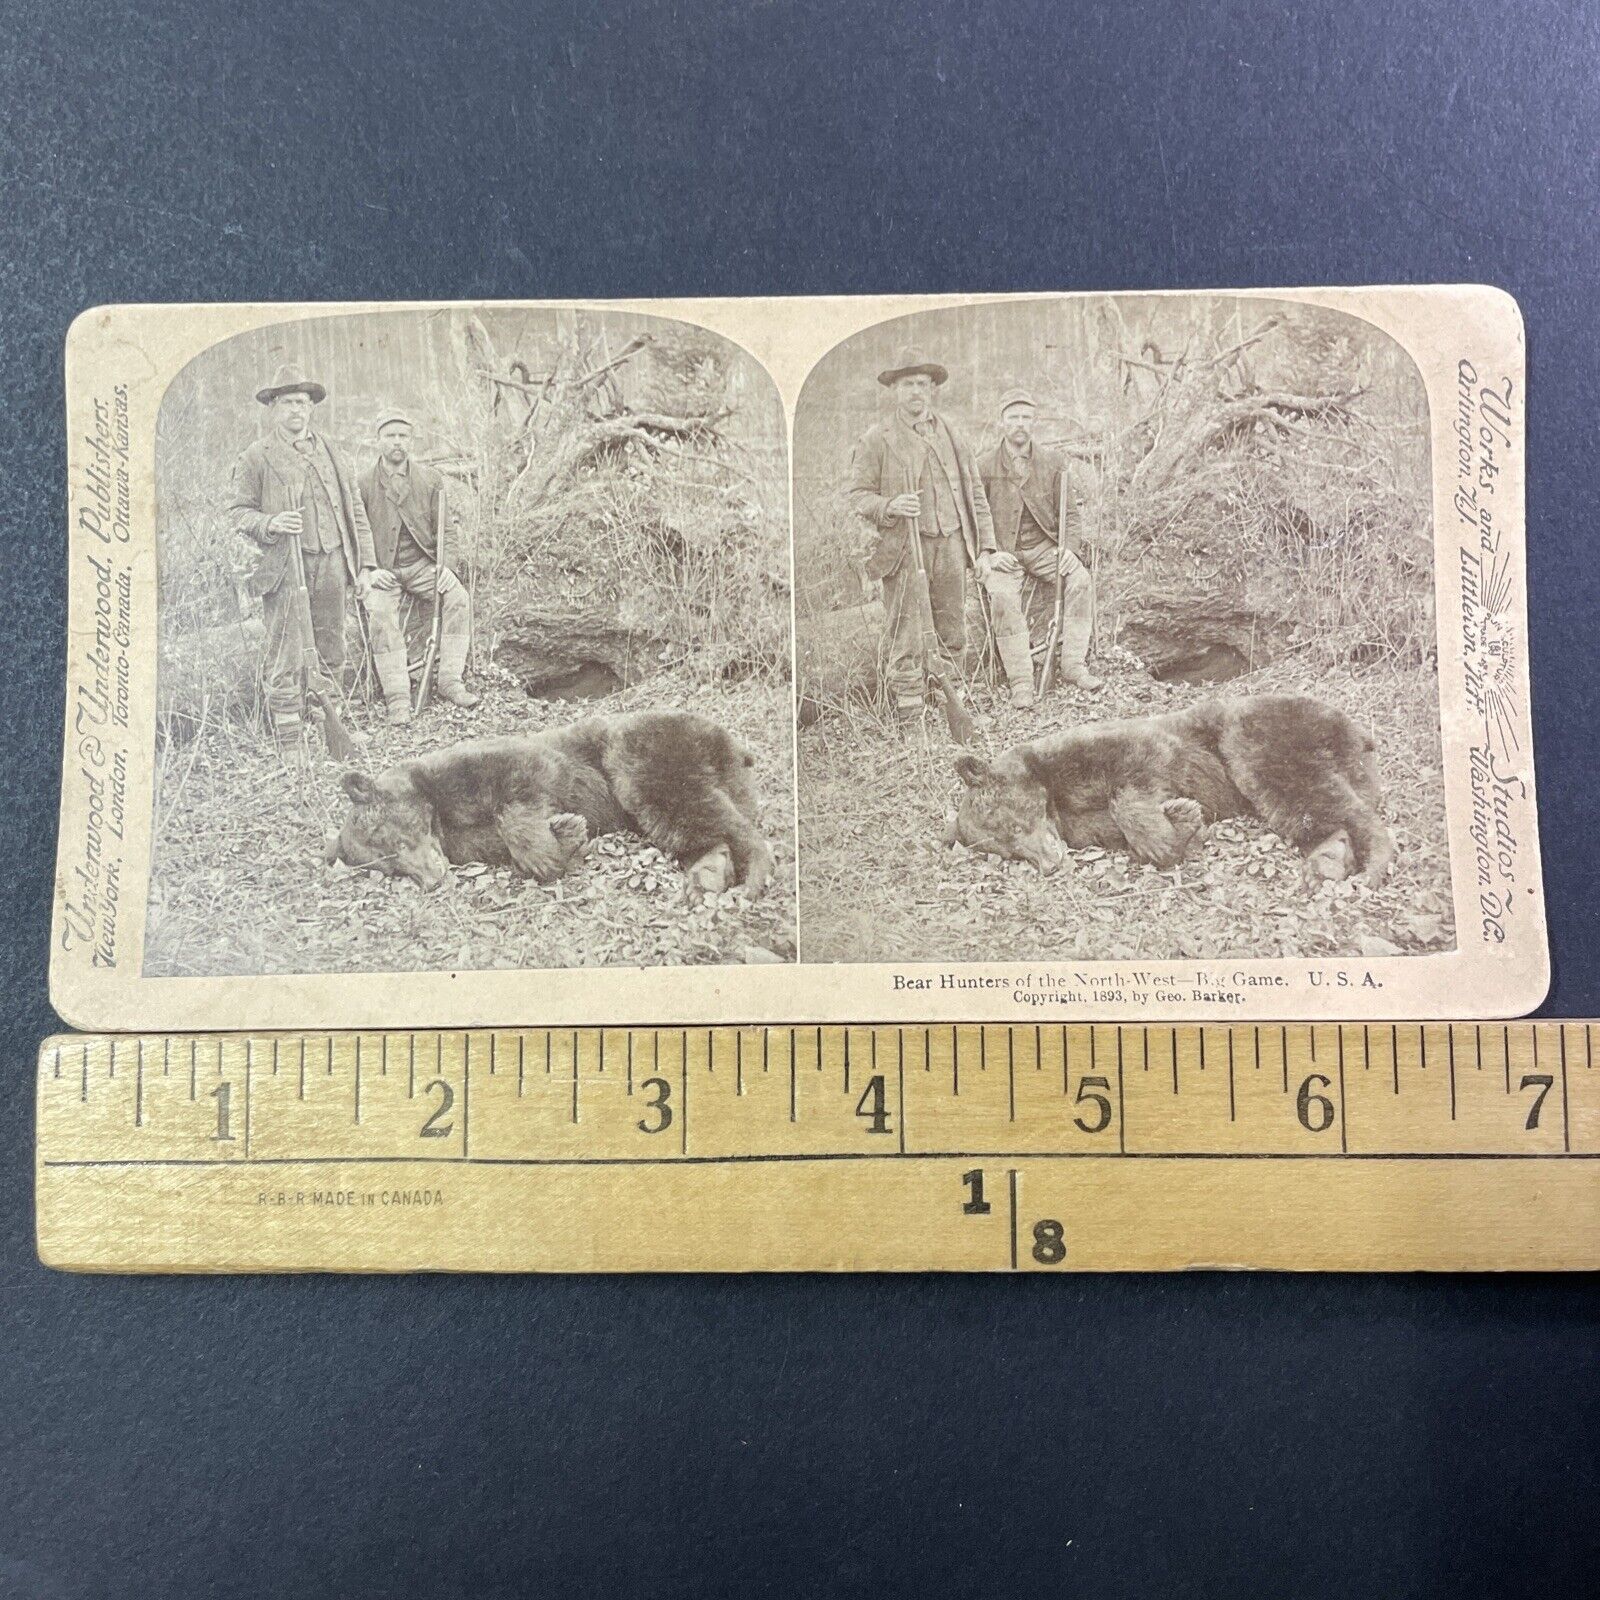 California Grizzly Bear Shot Dead Stereoview Truckee George Barker 1893 X1255